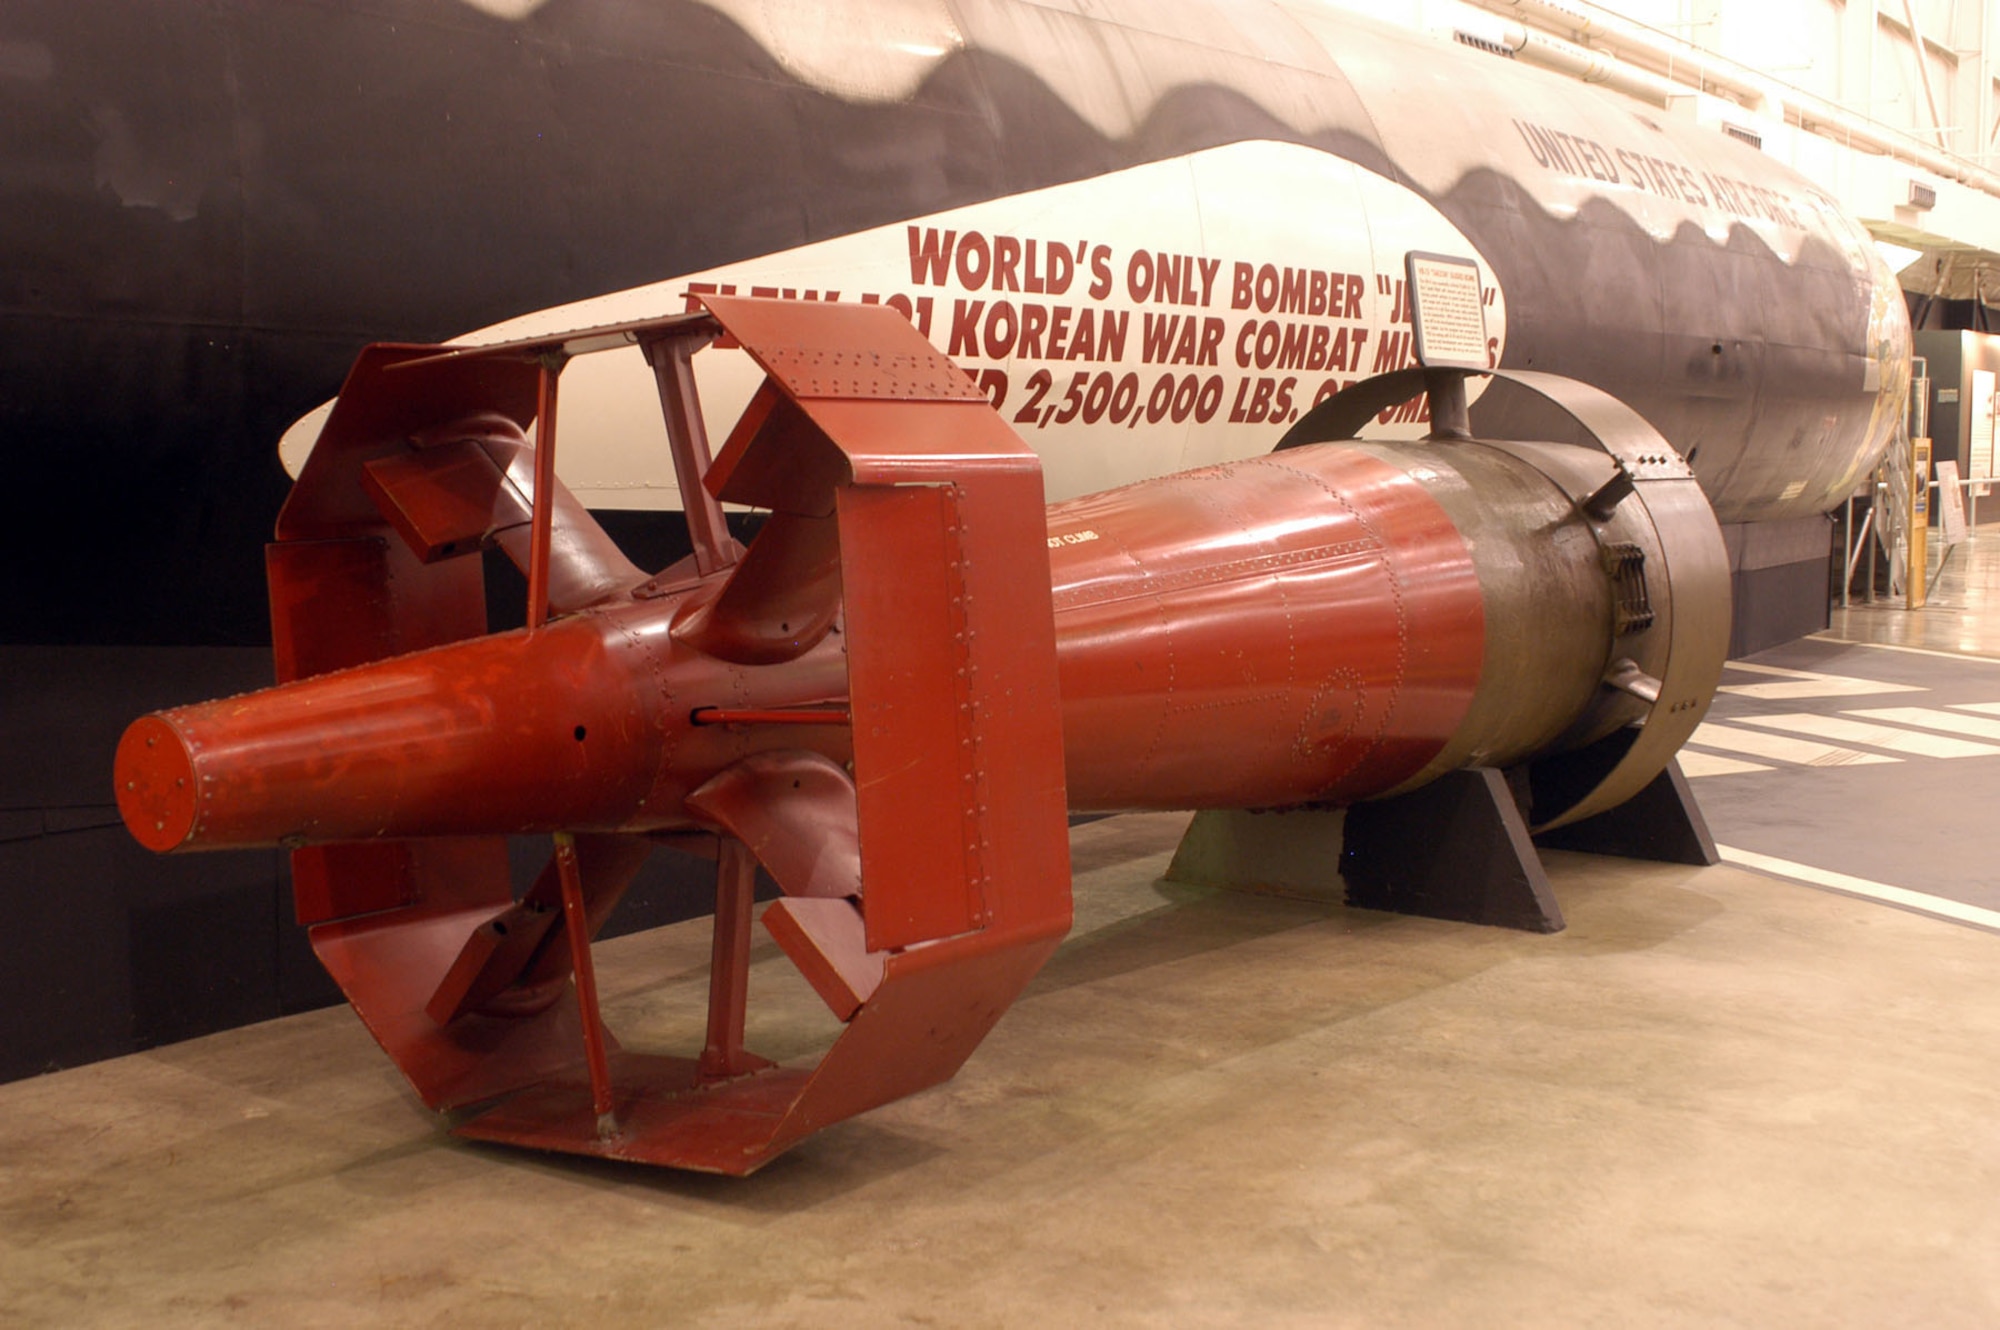 DAYTON, Ohio -- VB-13 Tarzon Guided Bomb on display in the Korean War Gallery at the National Museum of the United States Air Force. (U.S. Air Force photo)